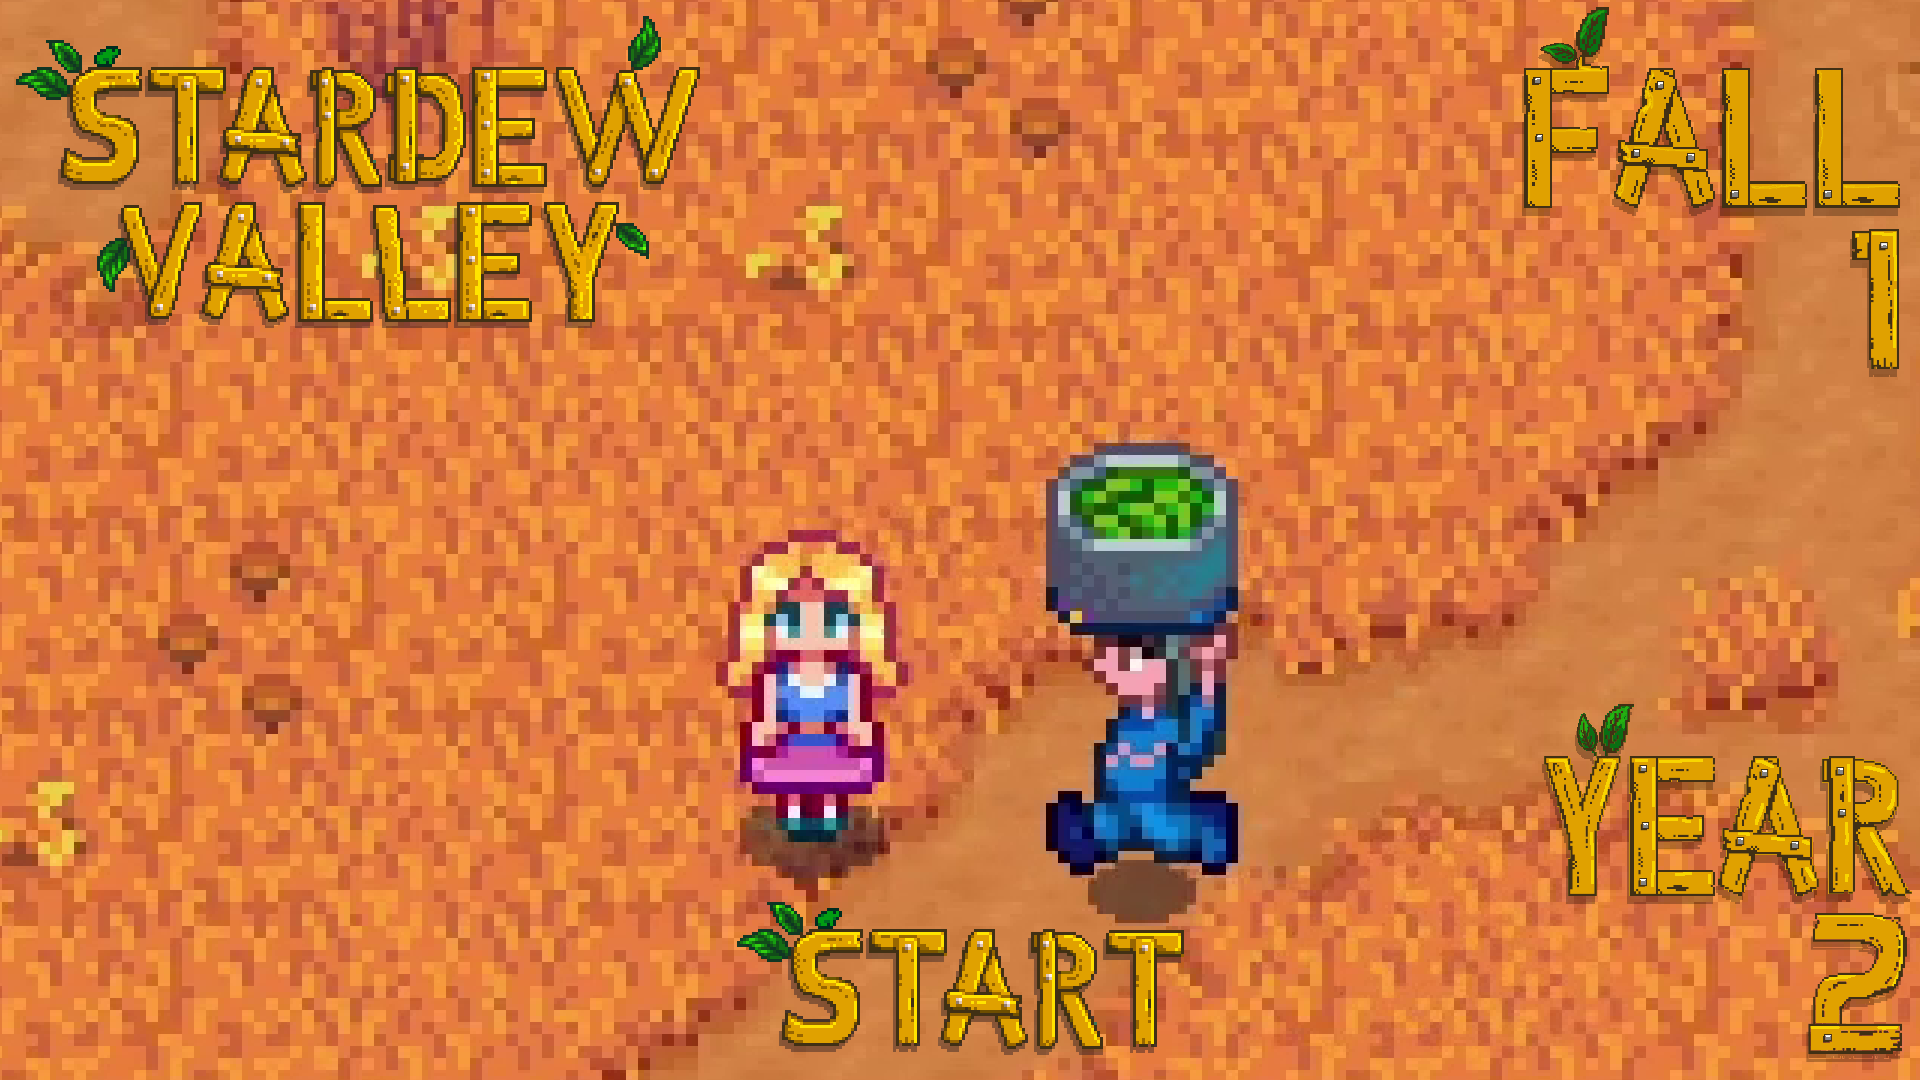 Consequences – Stardew Valley, Fall 1, Year 2, Start